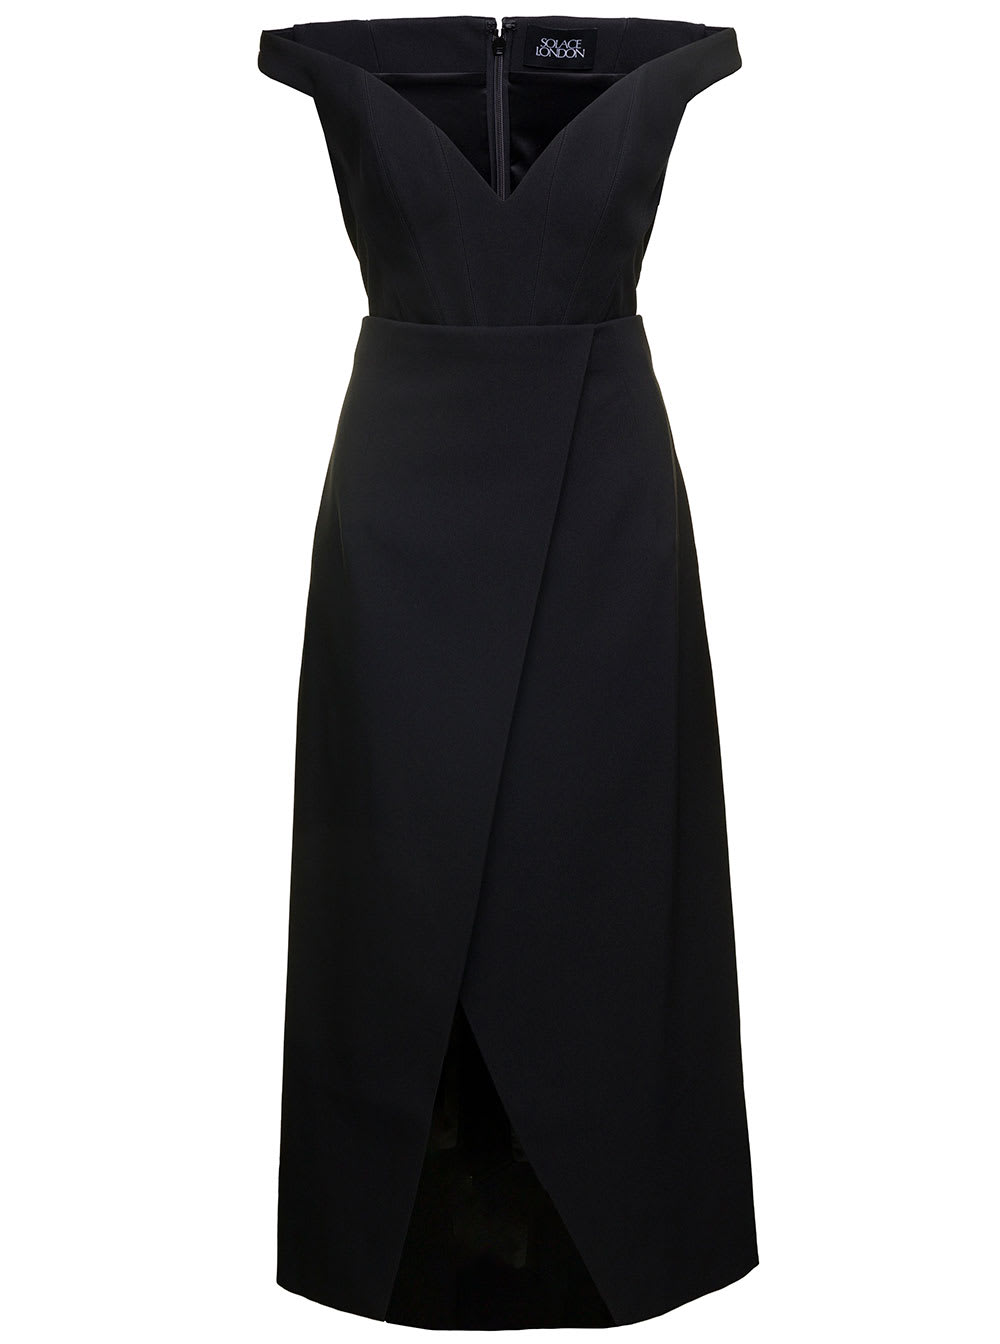 Black Midi Dress With Flared Skirt And Asymmetric Vent In Polyester Woman